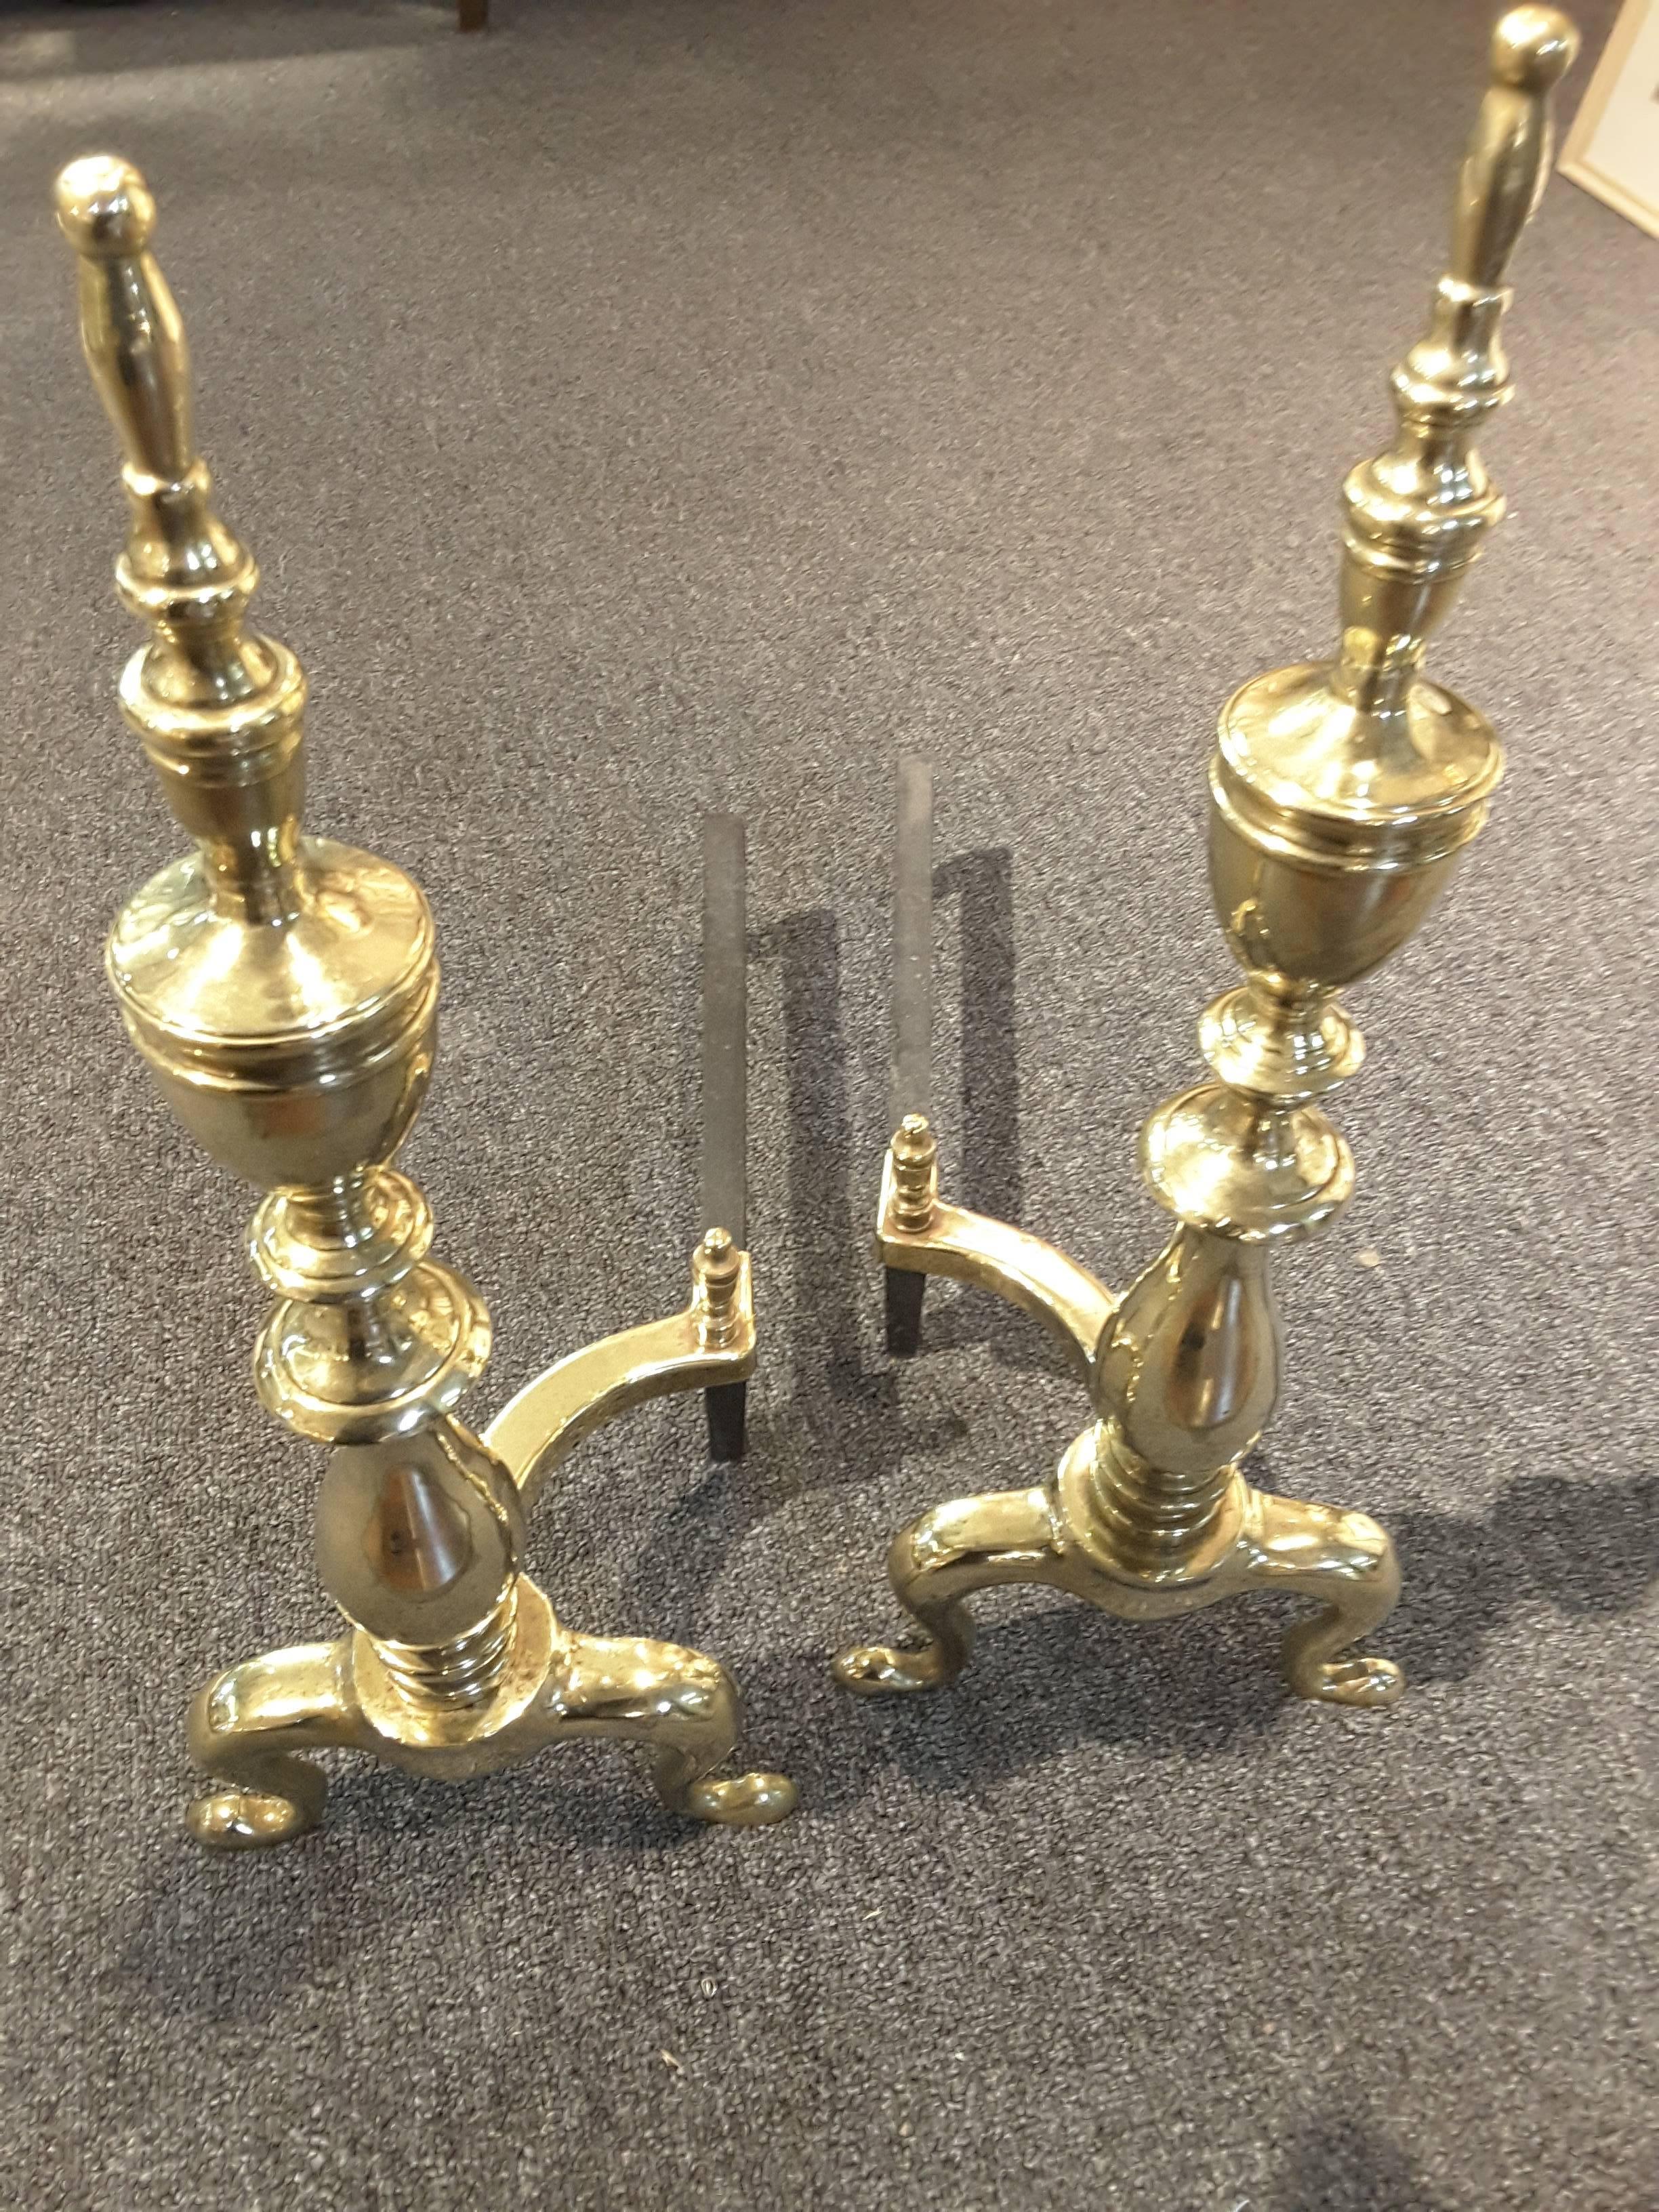 American Pair of Late 19th Century Solid Brass Andirons with Log Stops For Sale